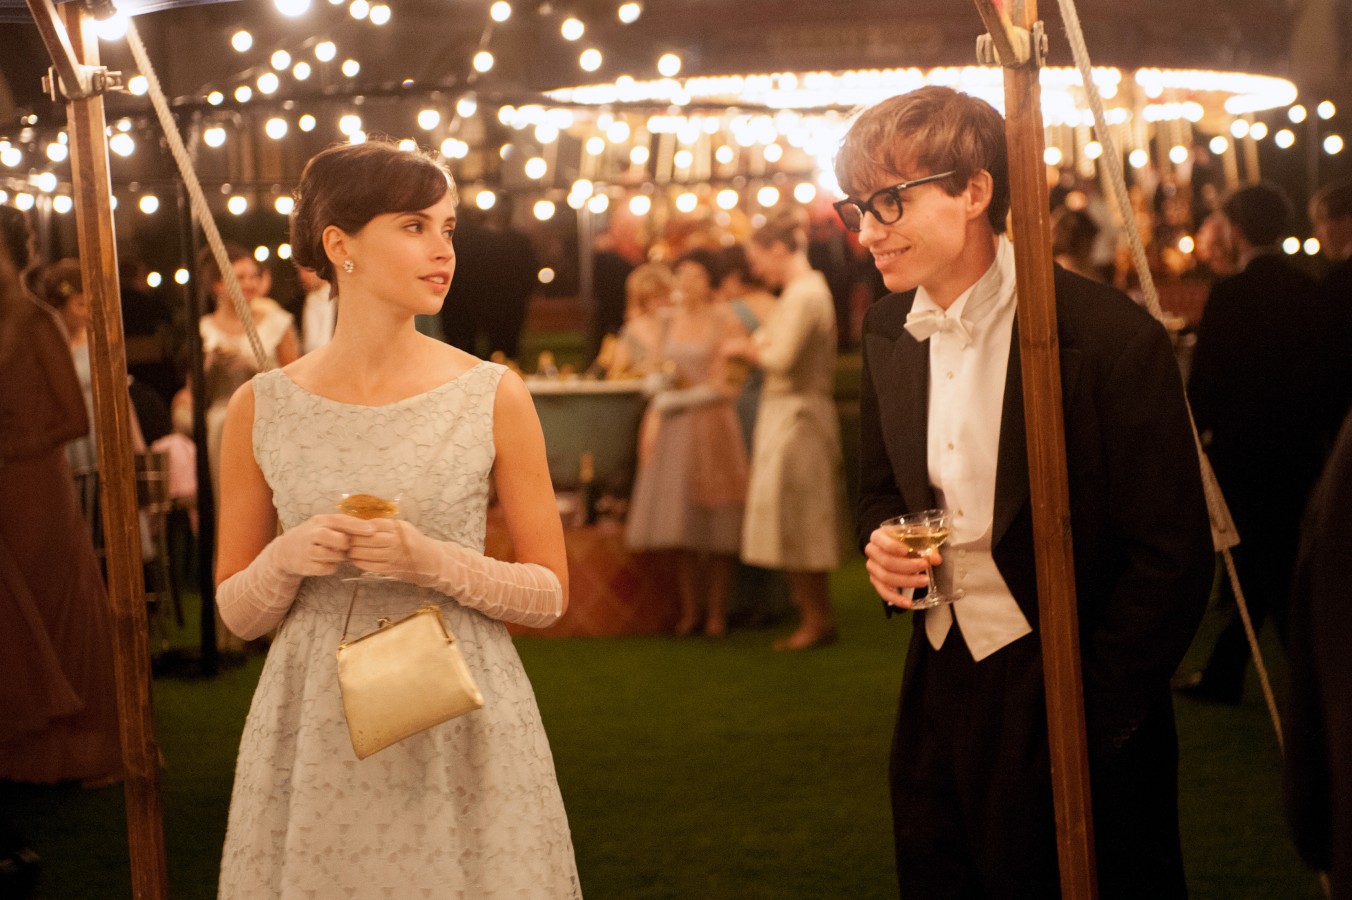 Her Şeyin Teorisi / The Theory of Everything (2014)